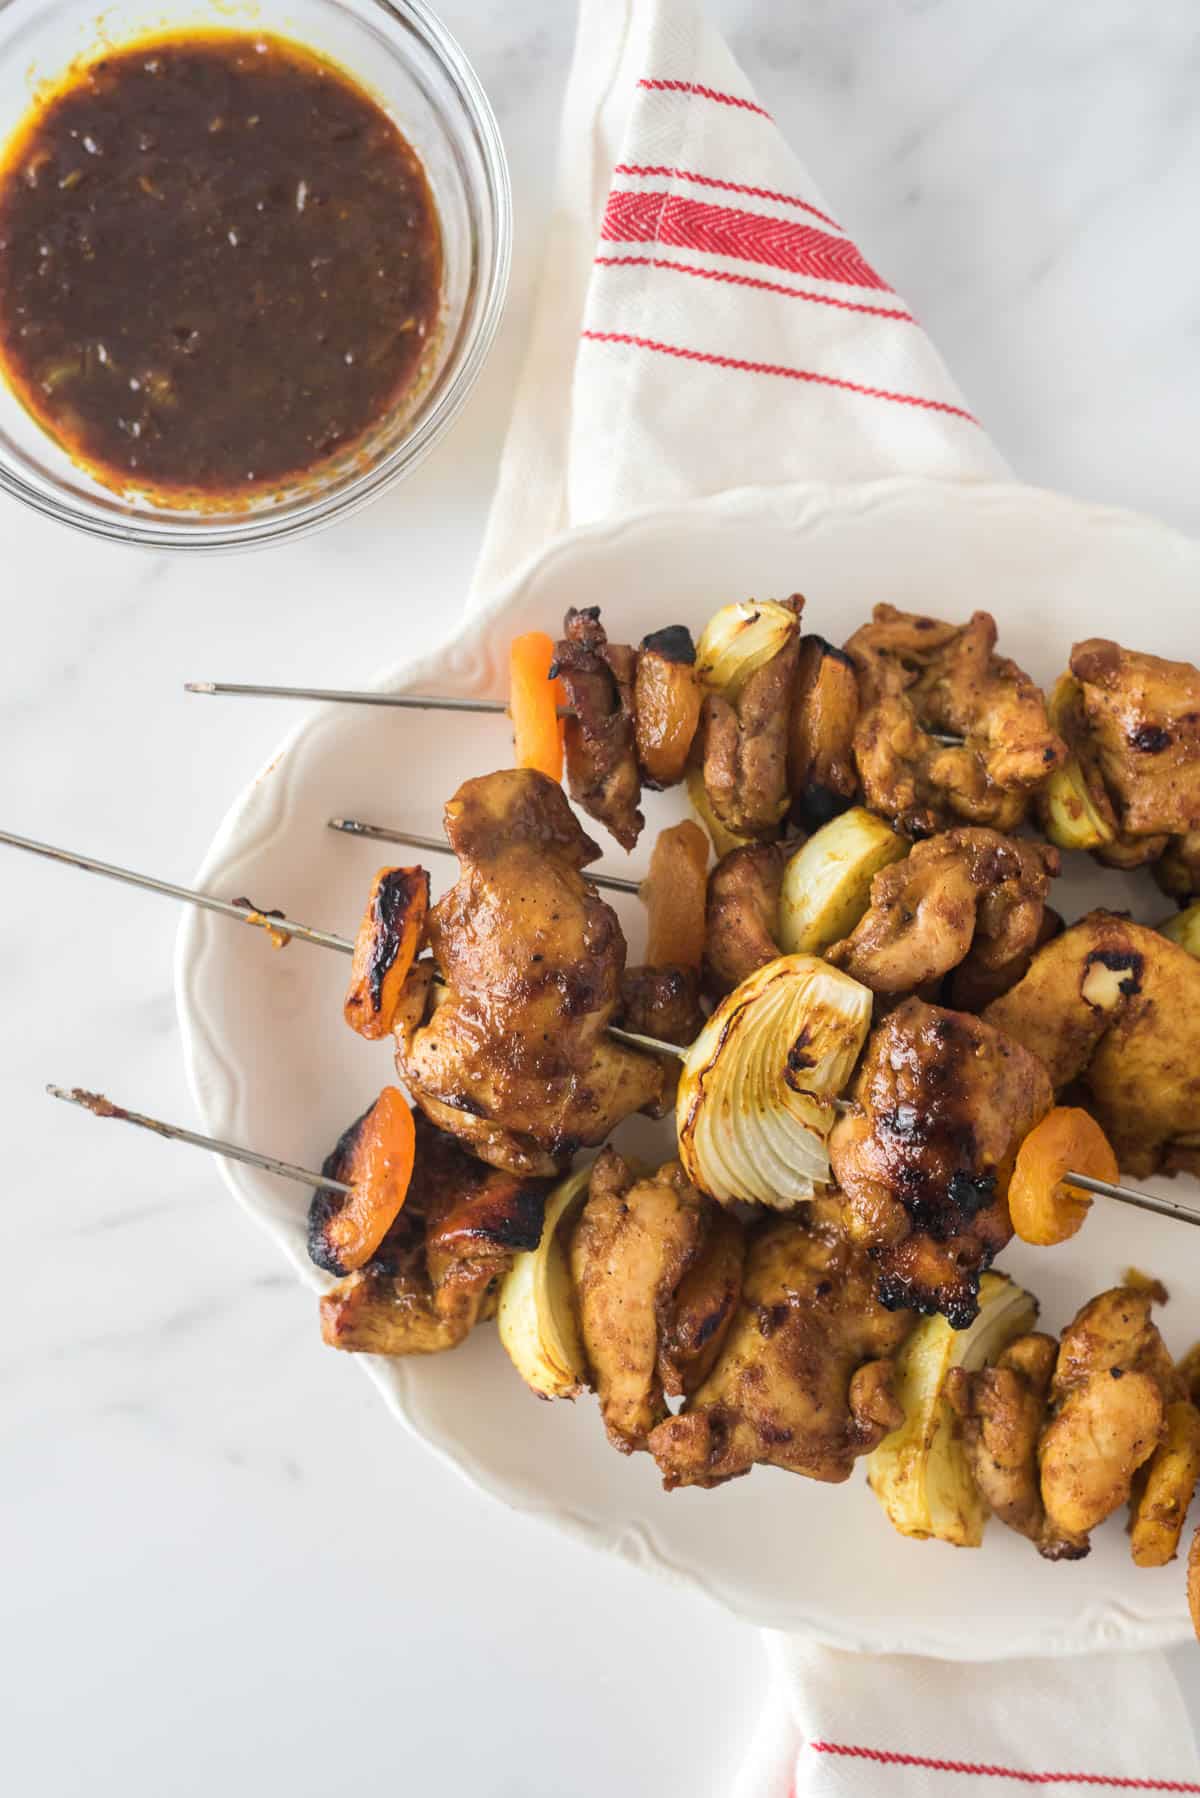 grilled skewers of chicken, onion and dried apricots on white platter with small glass bowl of glaze beside